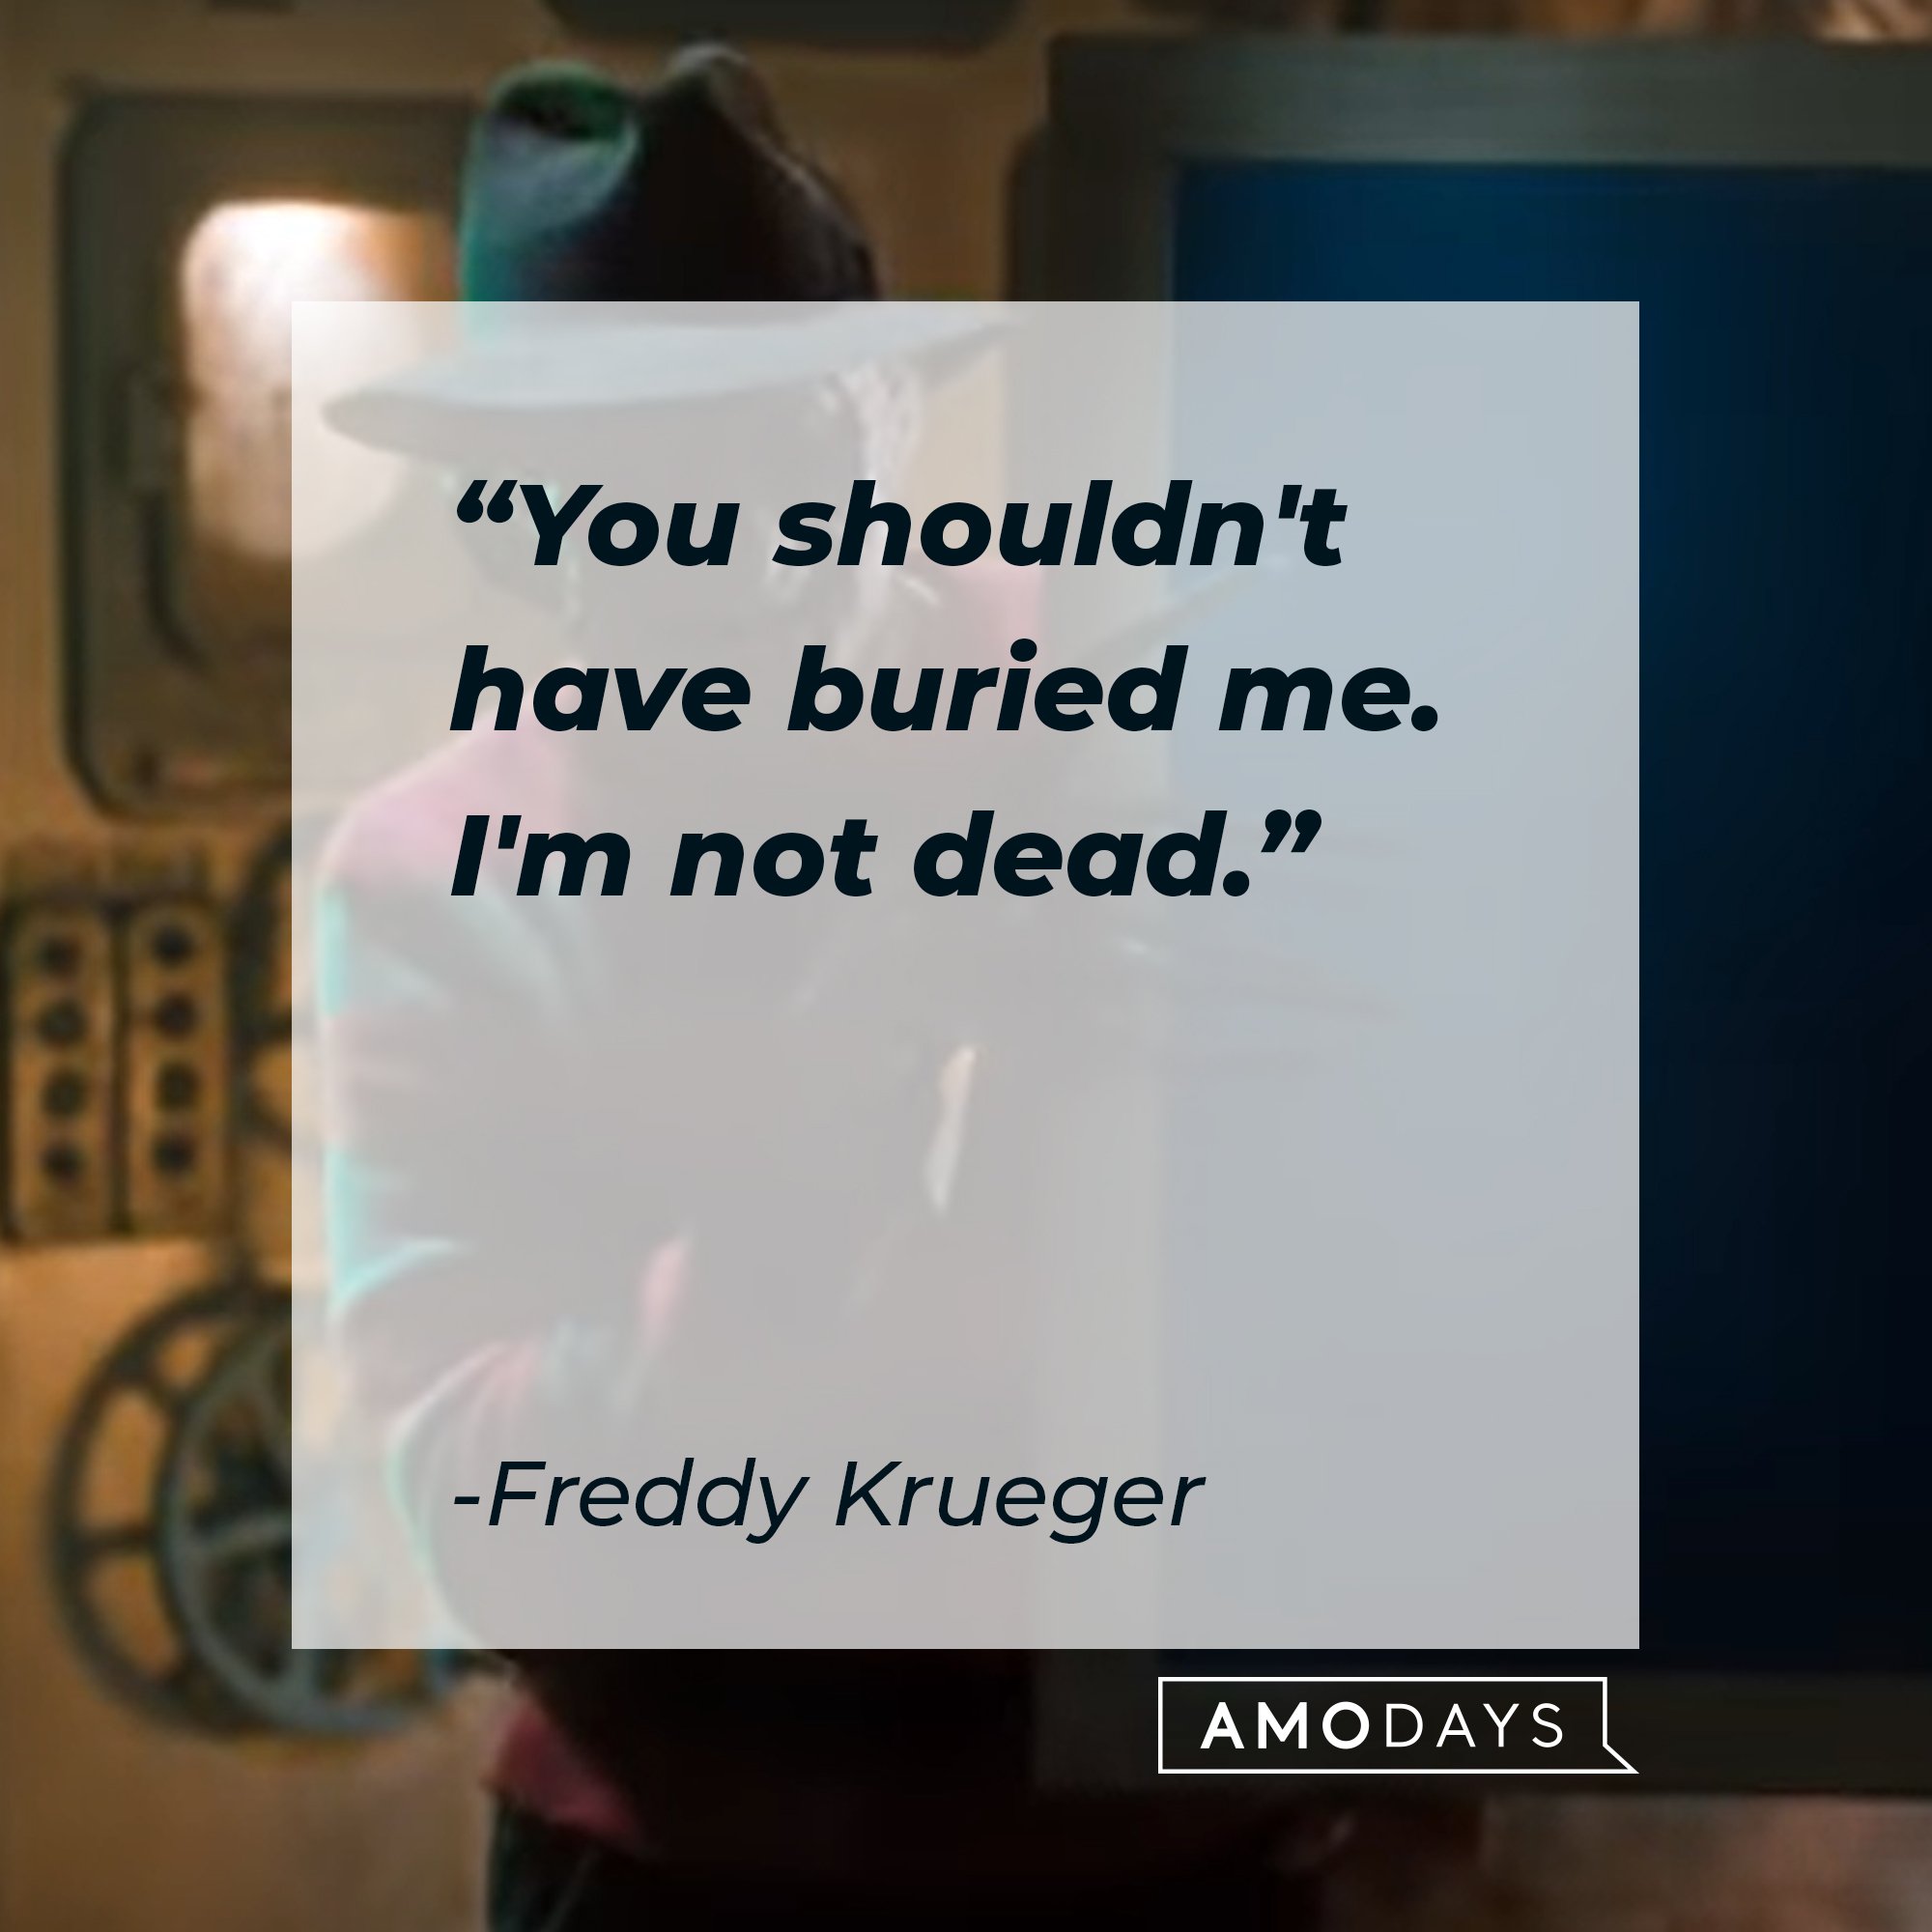 Freddy Krueger’s quote: "You shouldn't have buried me. I'm not dead." | Image: AmoDays